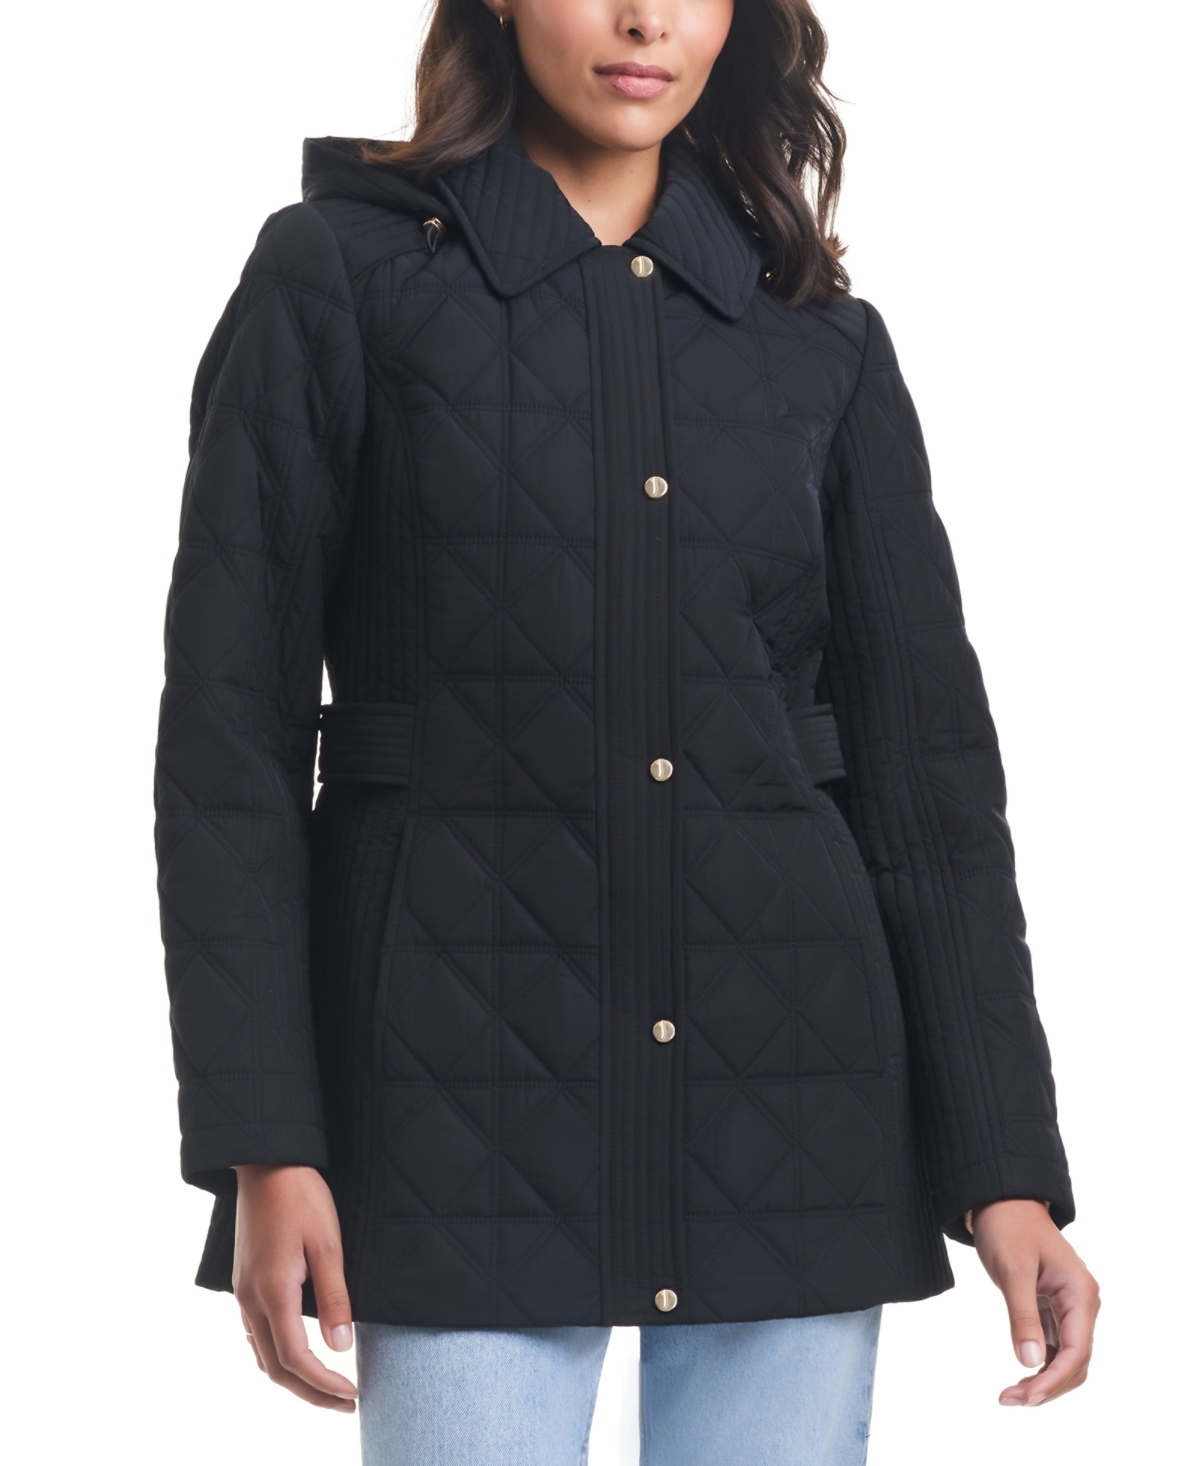 Women's Hooded Quilted Coat - Black